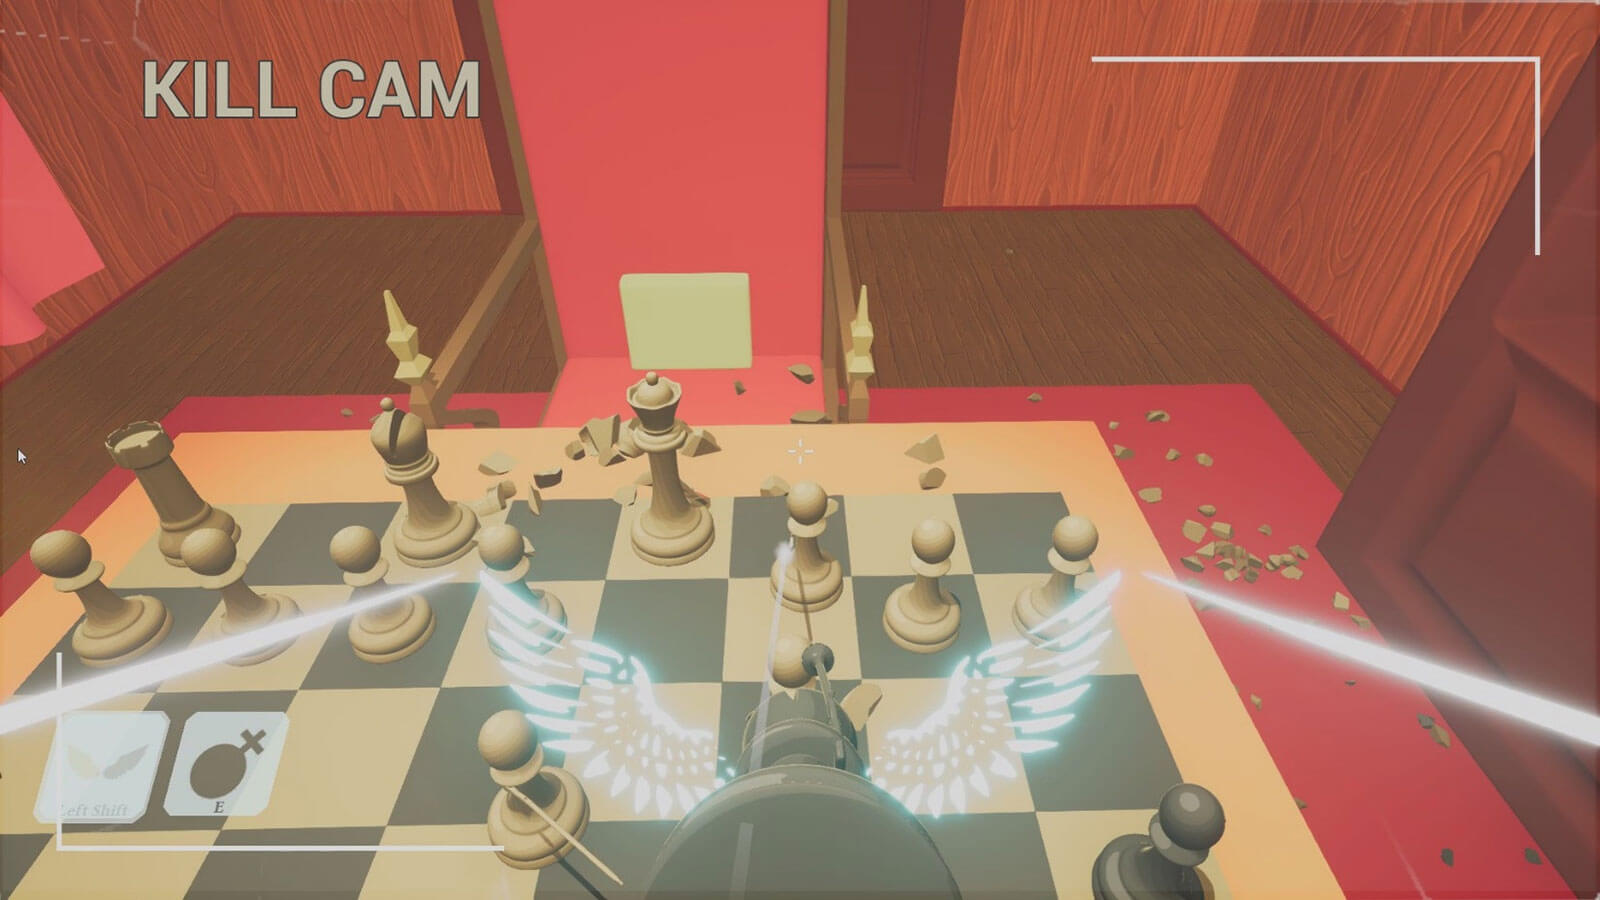 First-person view of a black chess piece attacking a white pawn with 'Kill Cam' written onscreen